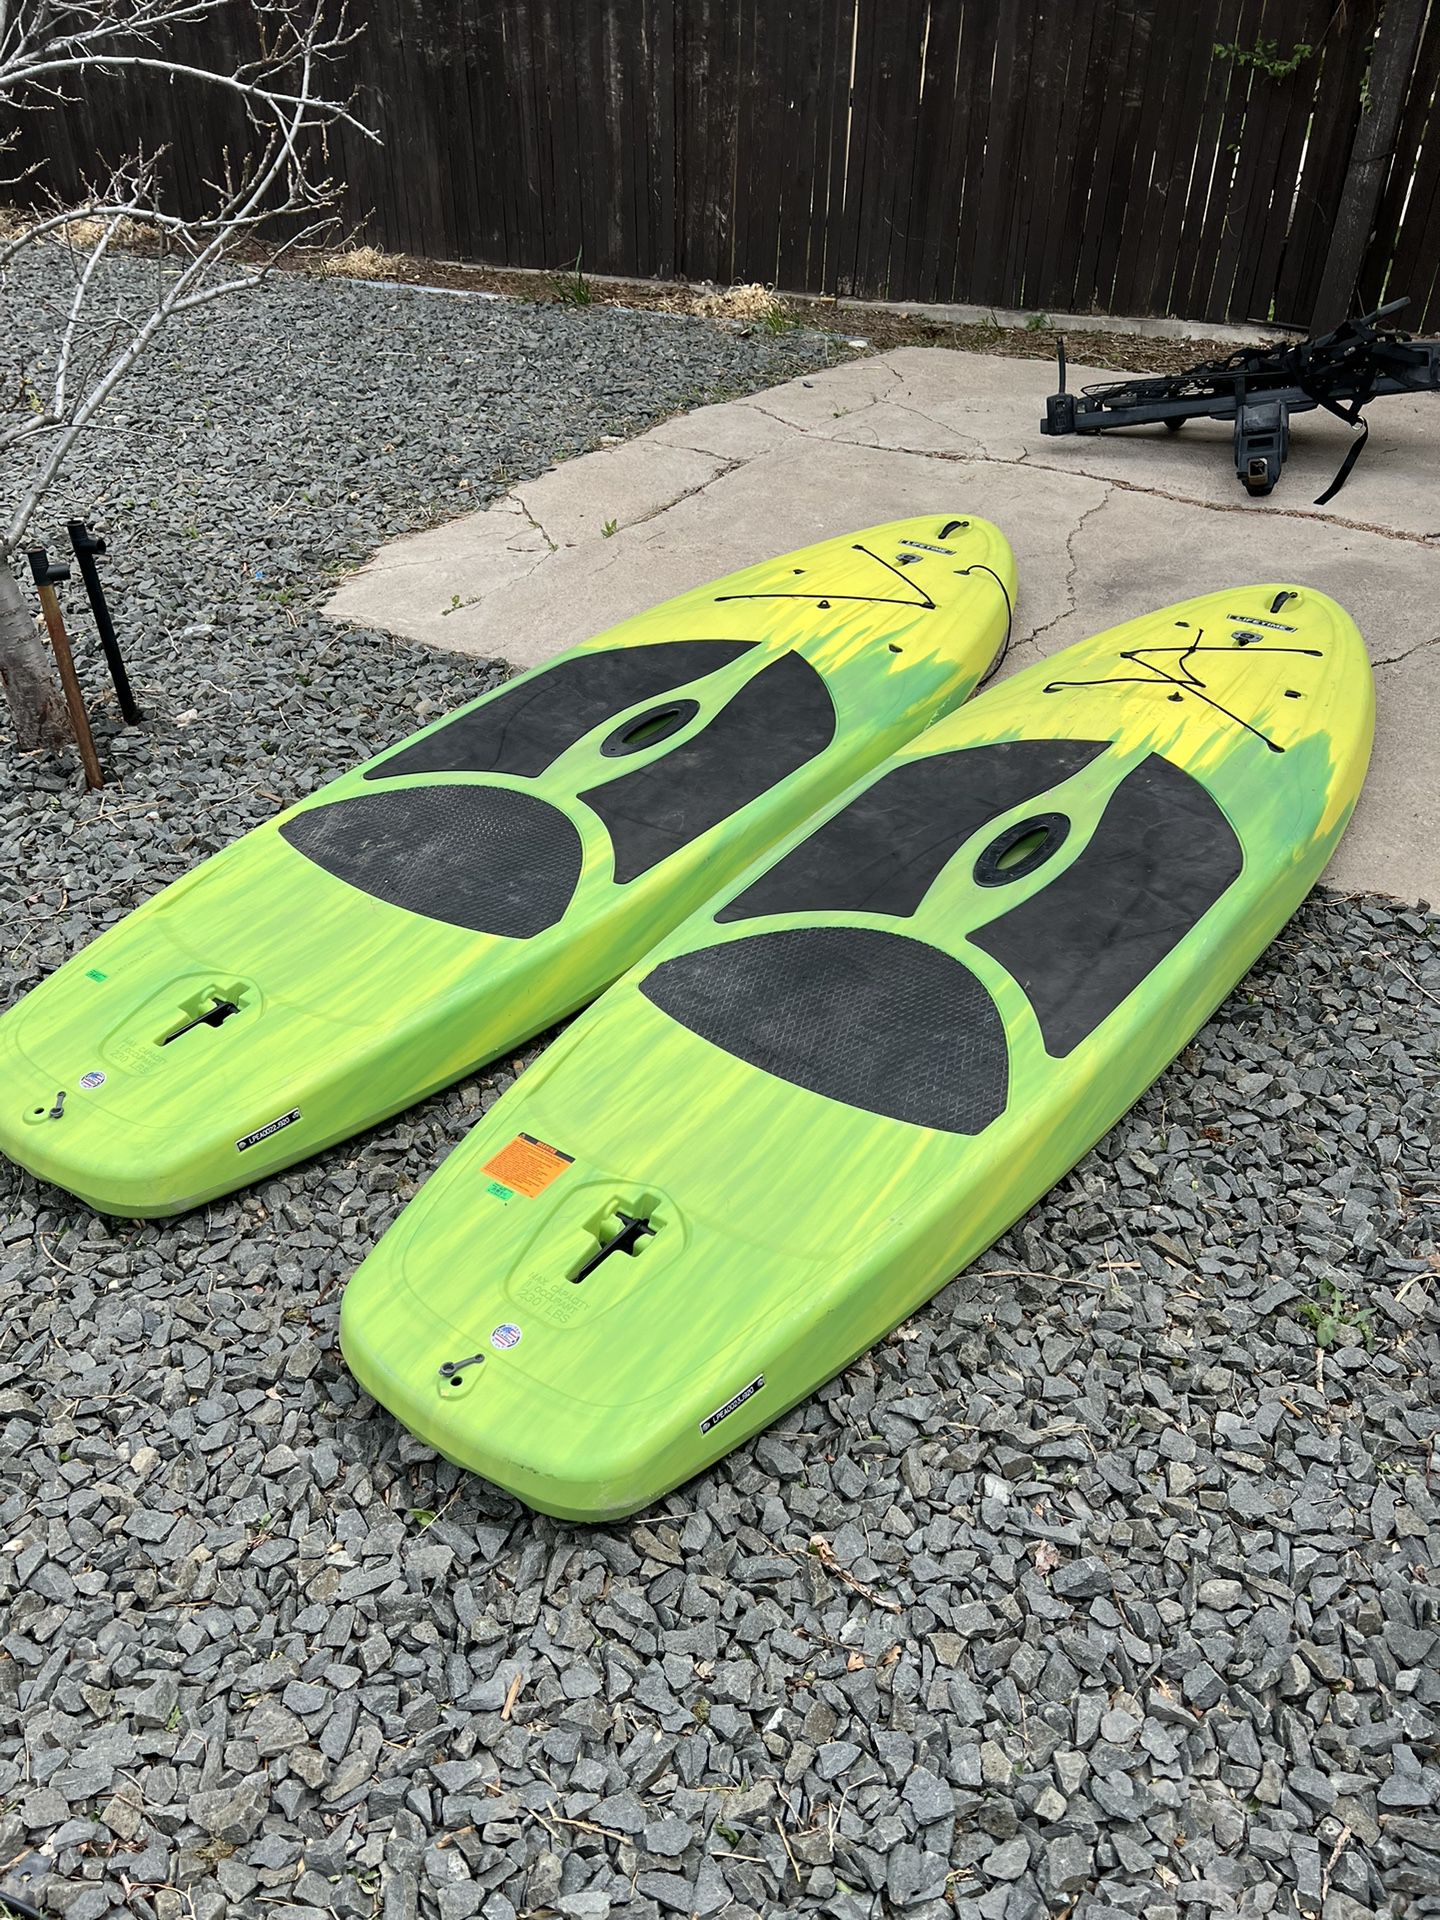 Lifetime Paddle boards $400